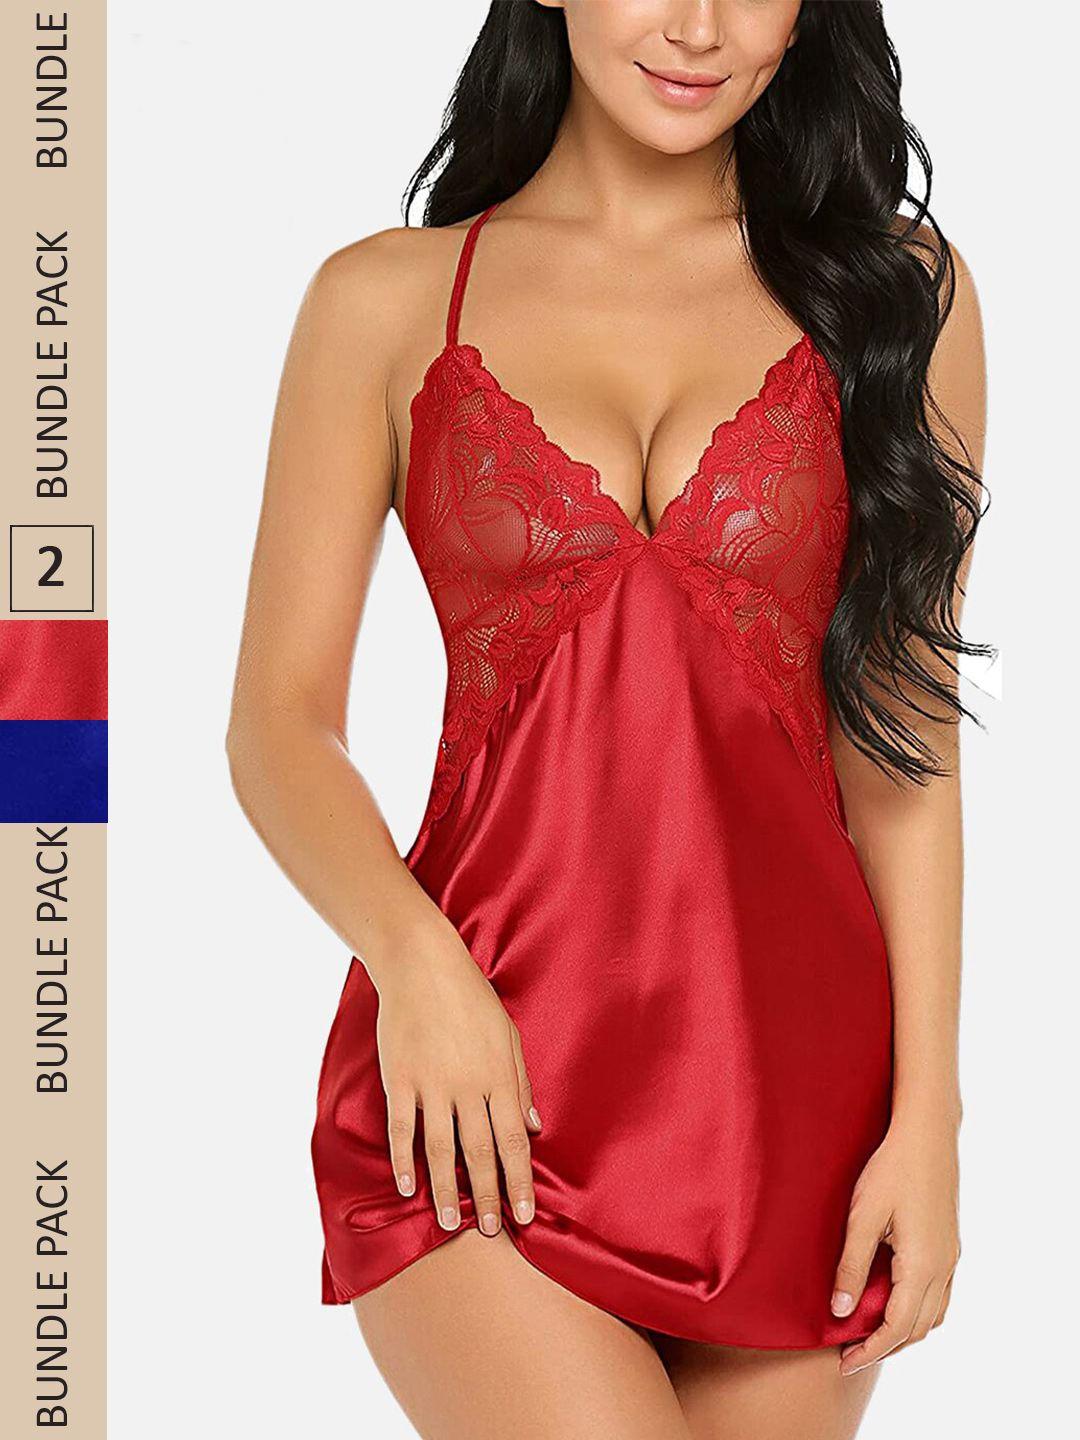 fims red & blue satin baby doll